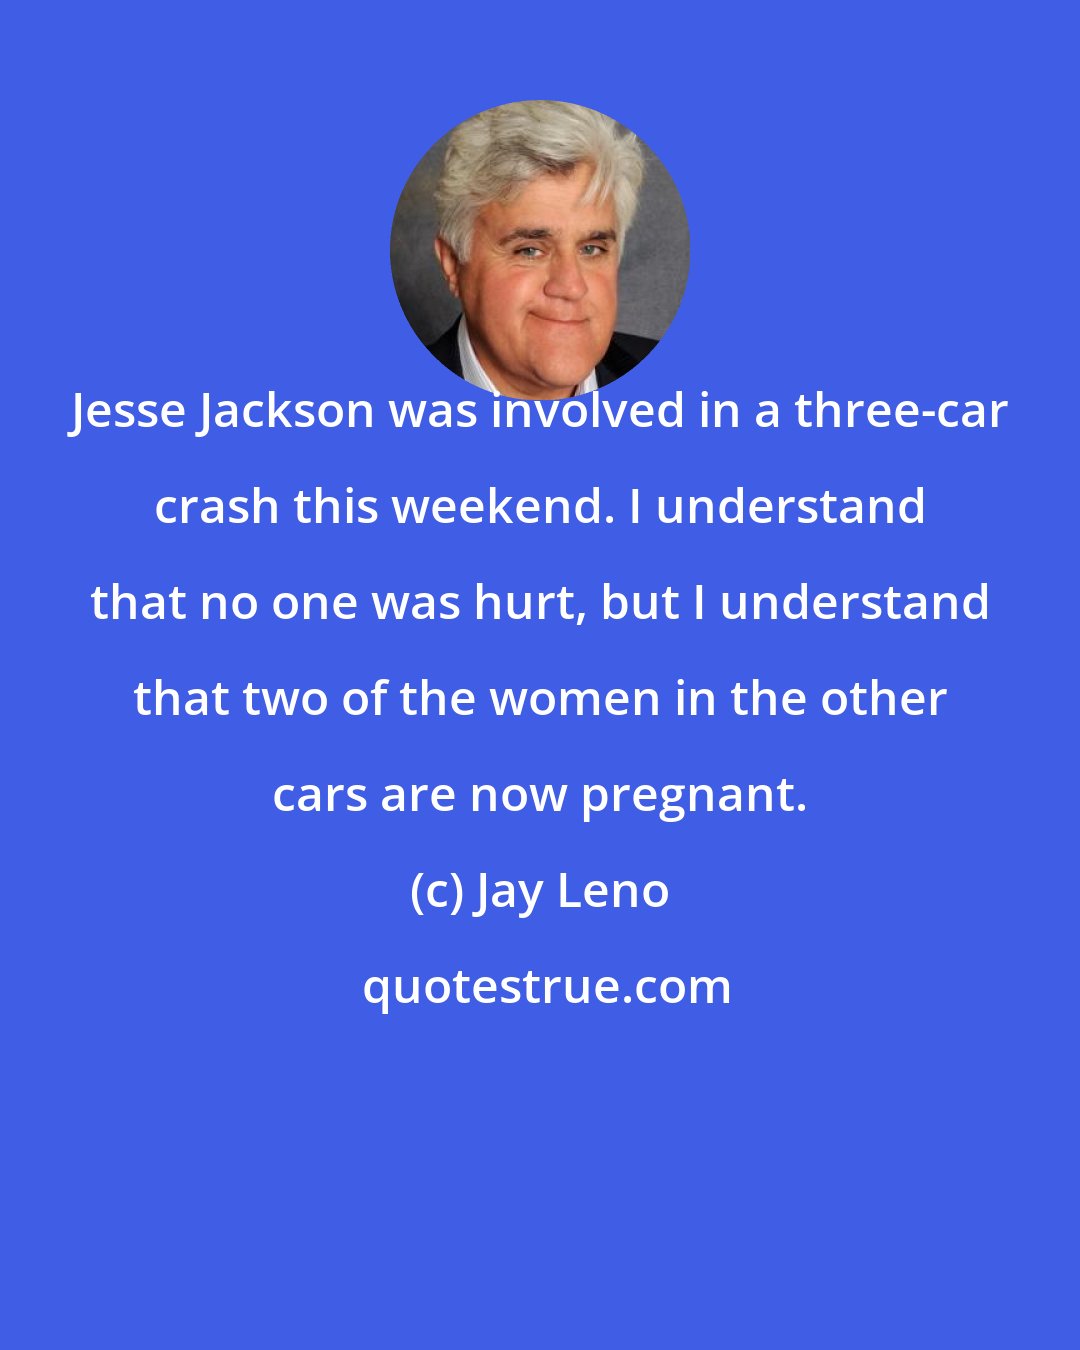 Jay Leno: Jesse Jackson was involved in a three-car crash this weekend. I understand that no one was hurt, but I understand that two of the women in the other cars are now pregnant.